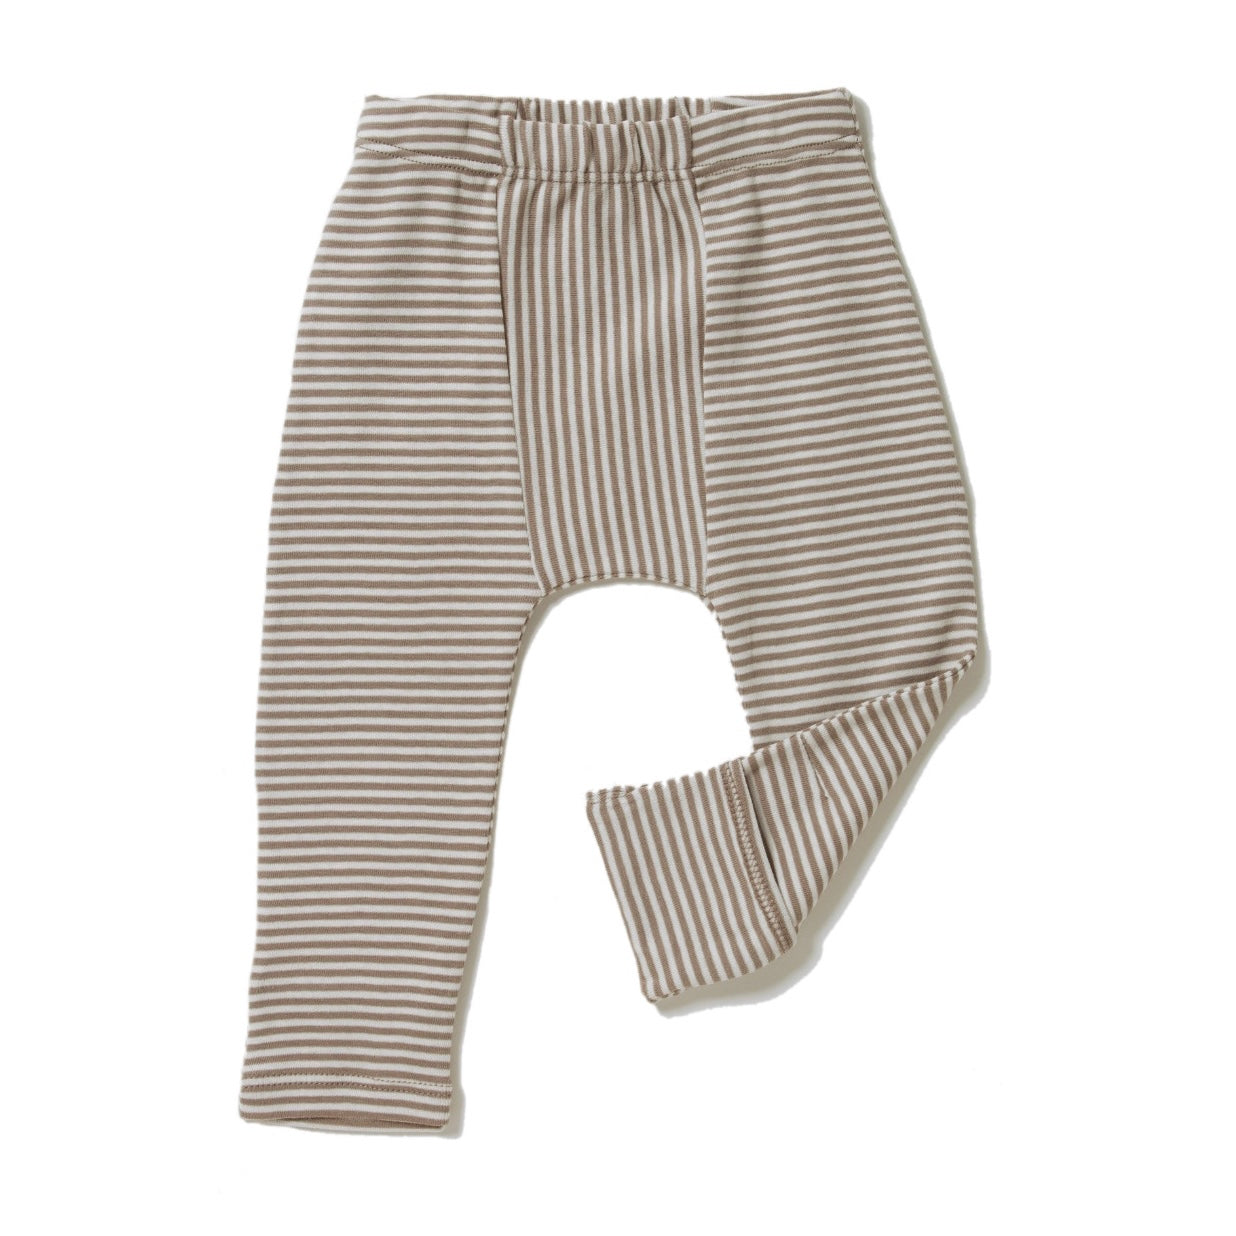 brown and cream color petite stripes leggings with feet covers. Direction play at center. Soft elastic waistband and slim fit. 100% organic cotton petite stripe knit.